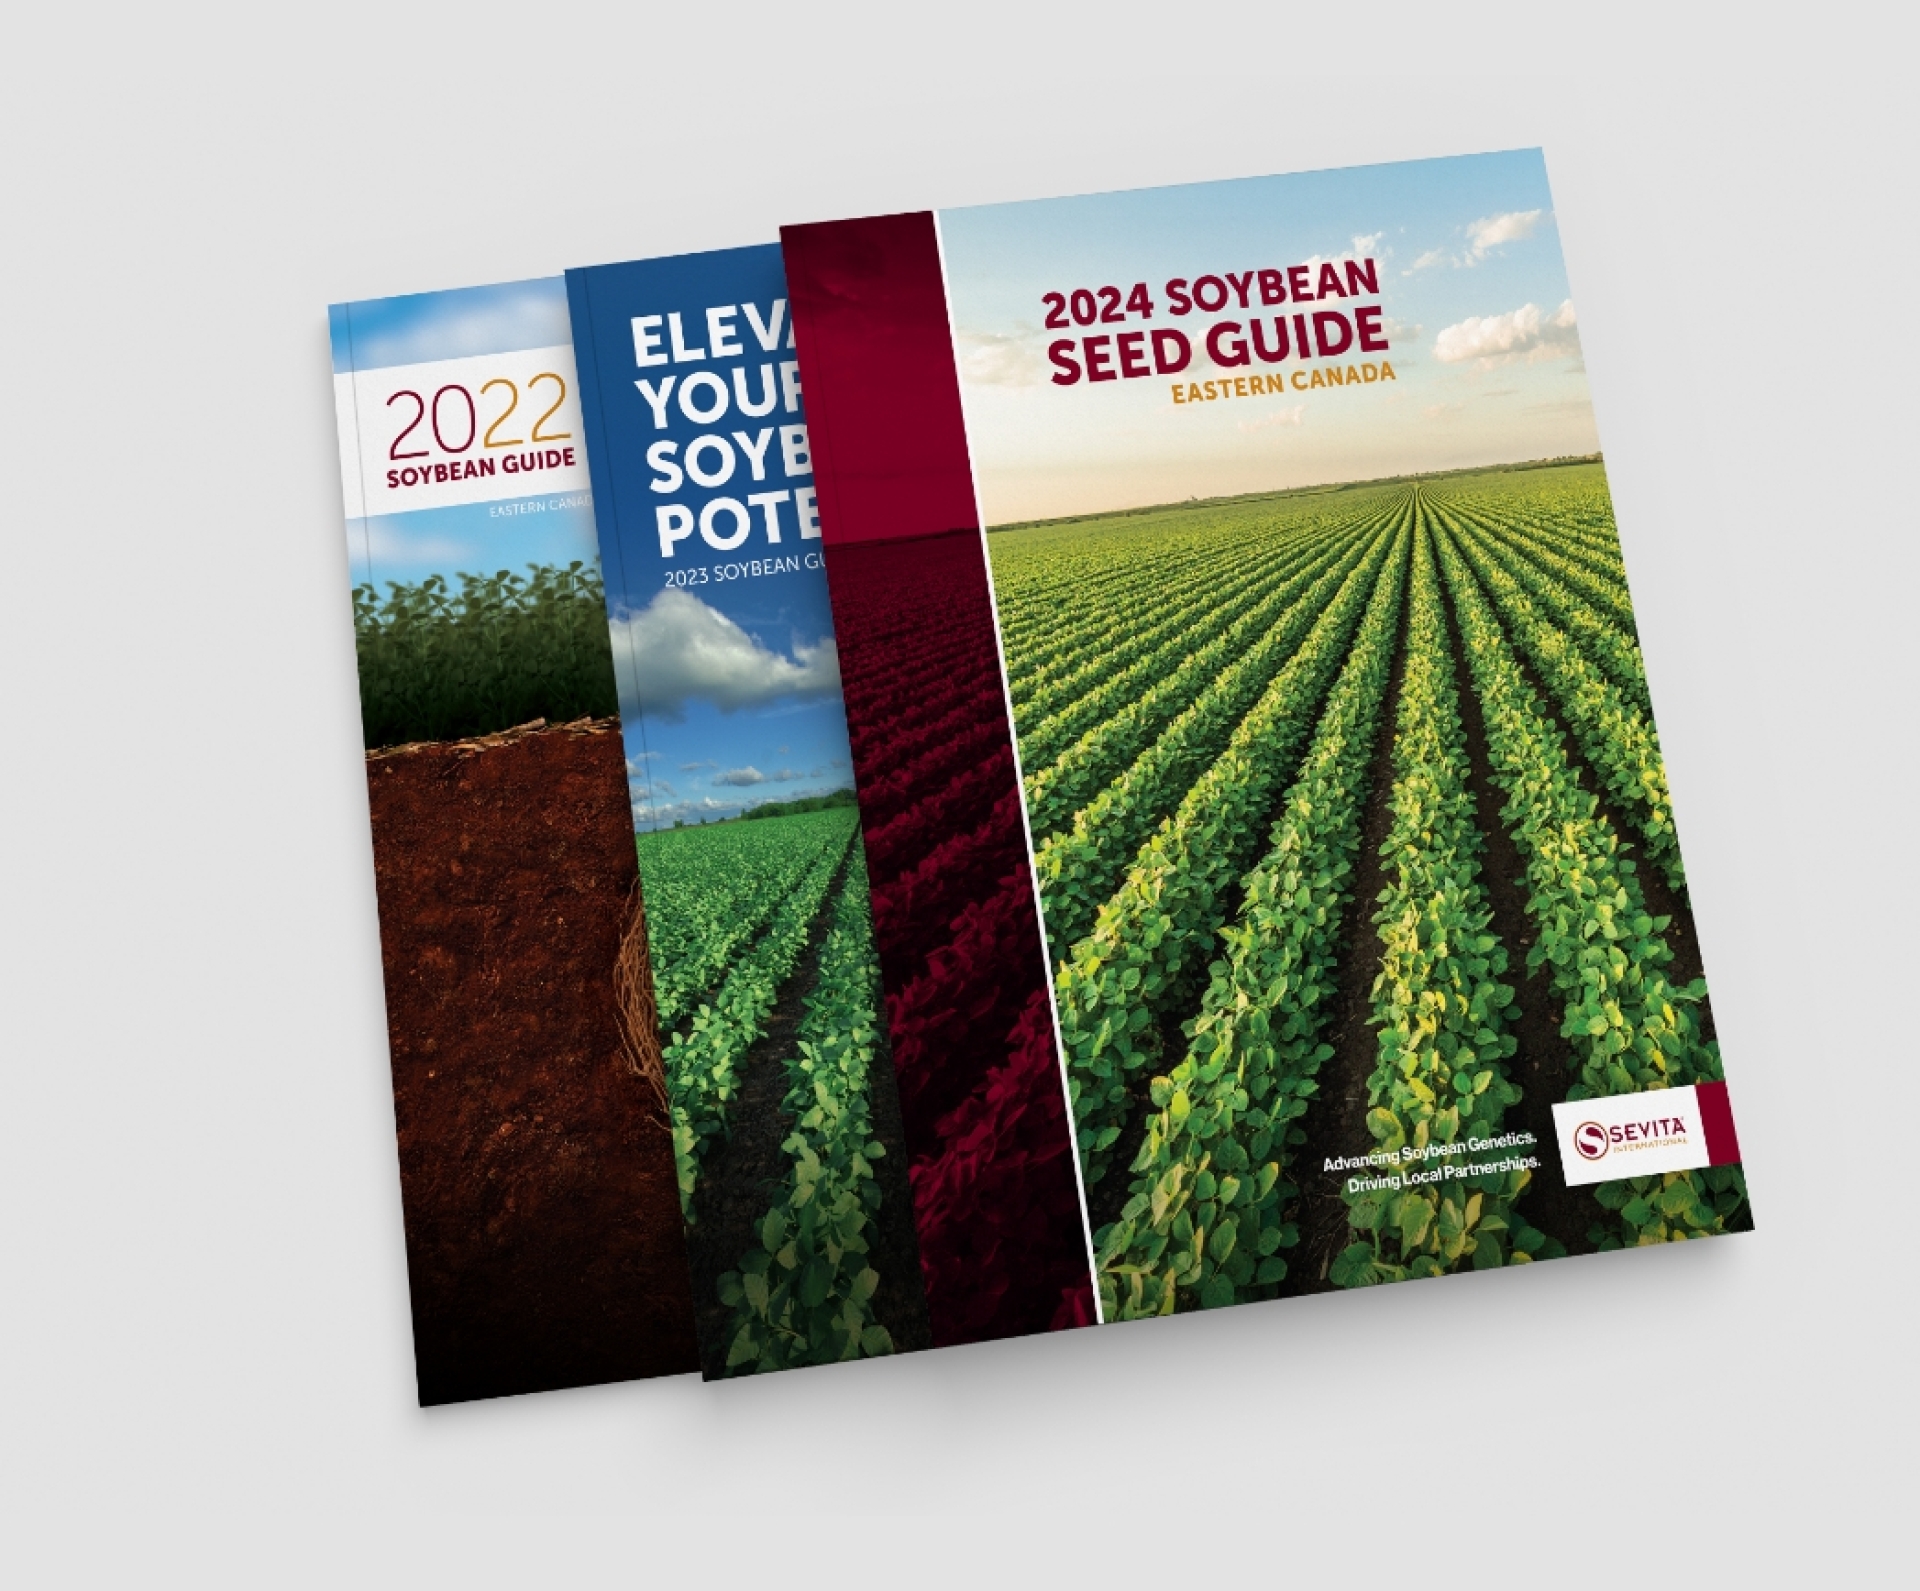 The covers of Sevita seed guide publication designs from 2022-2024